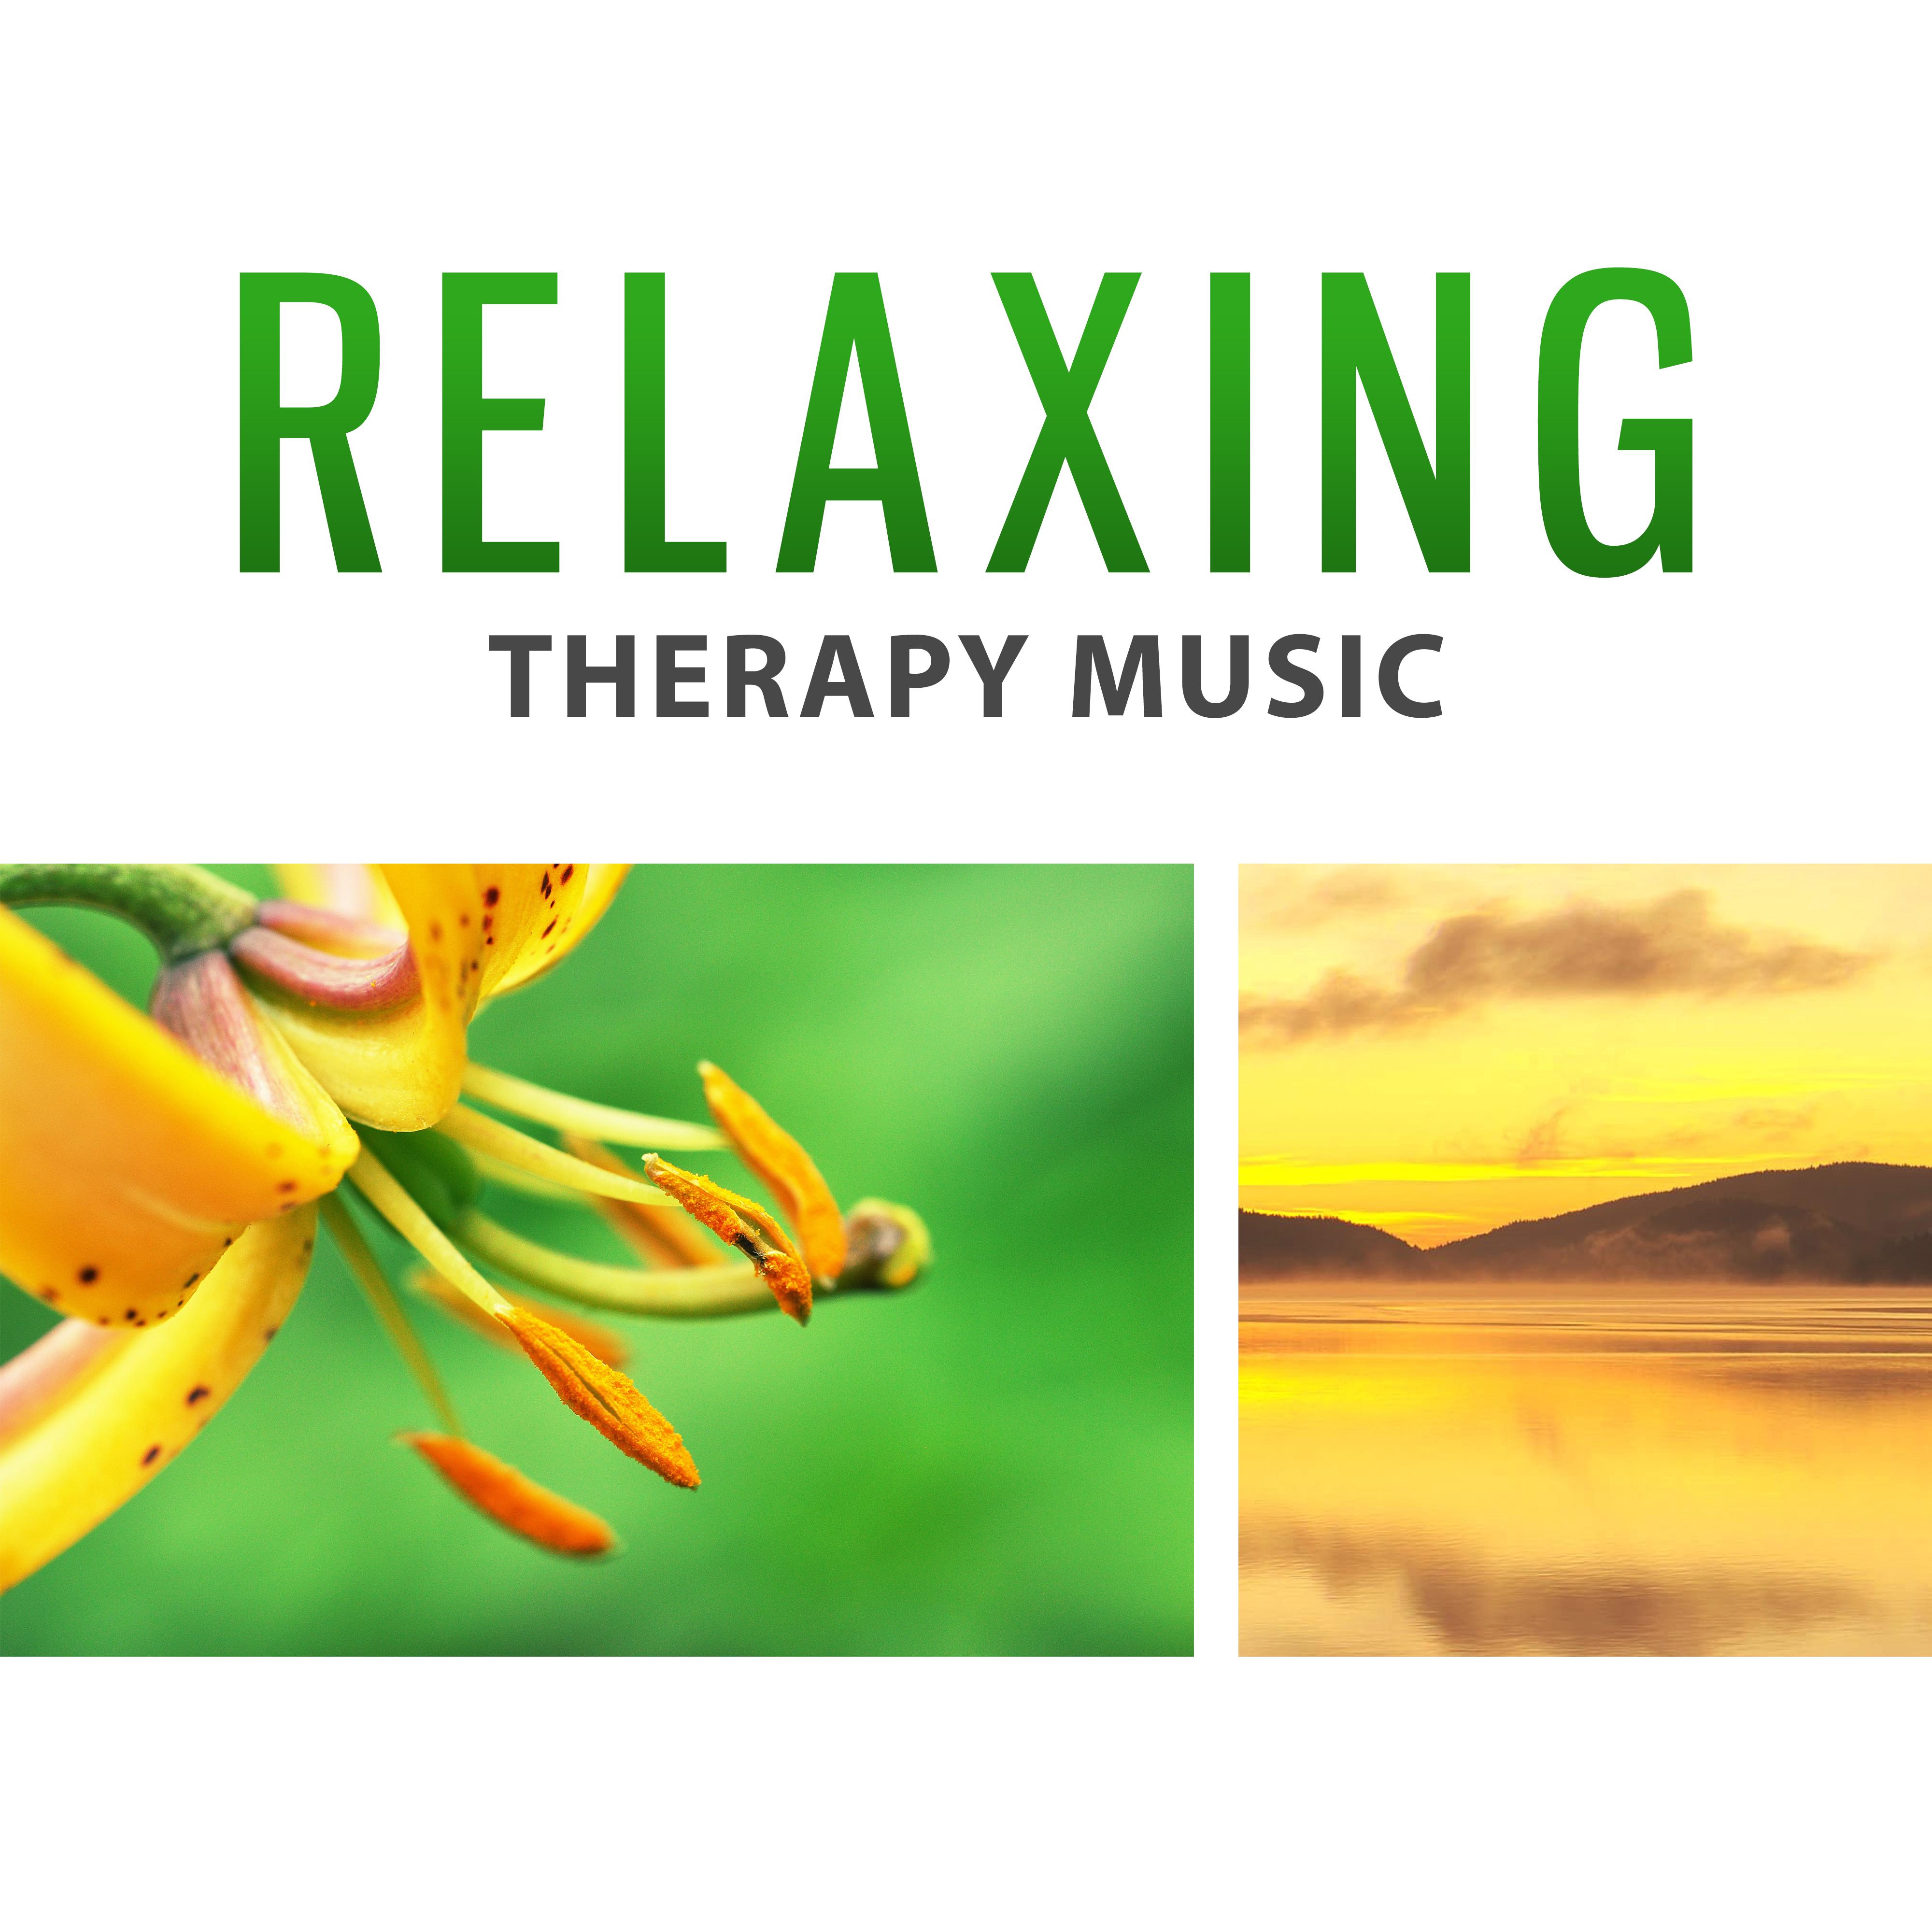 Relaxing Therapy Music  Gentle, Nature Sounds for Relaxation, Stress Relief, Calm Mind, Deep Sleep, Soothing Piano, Sounds of Birds, Rest